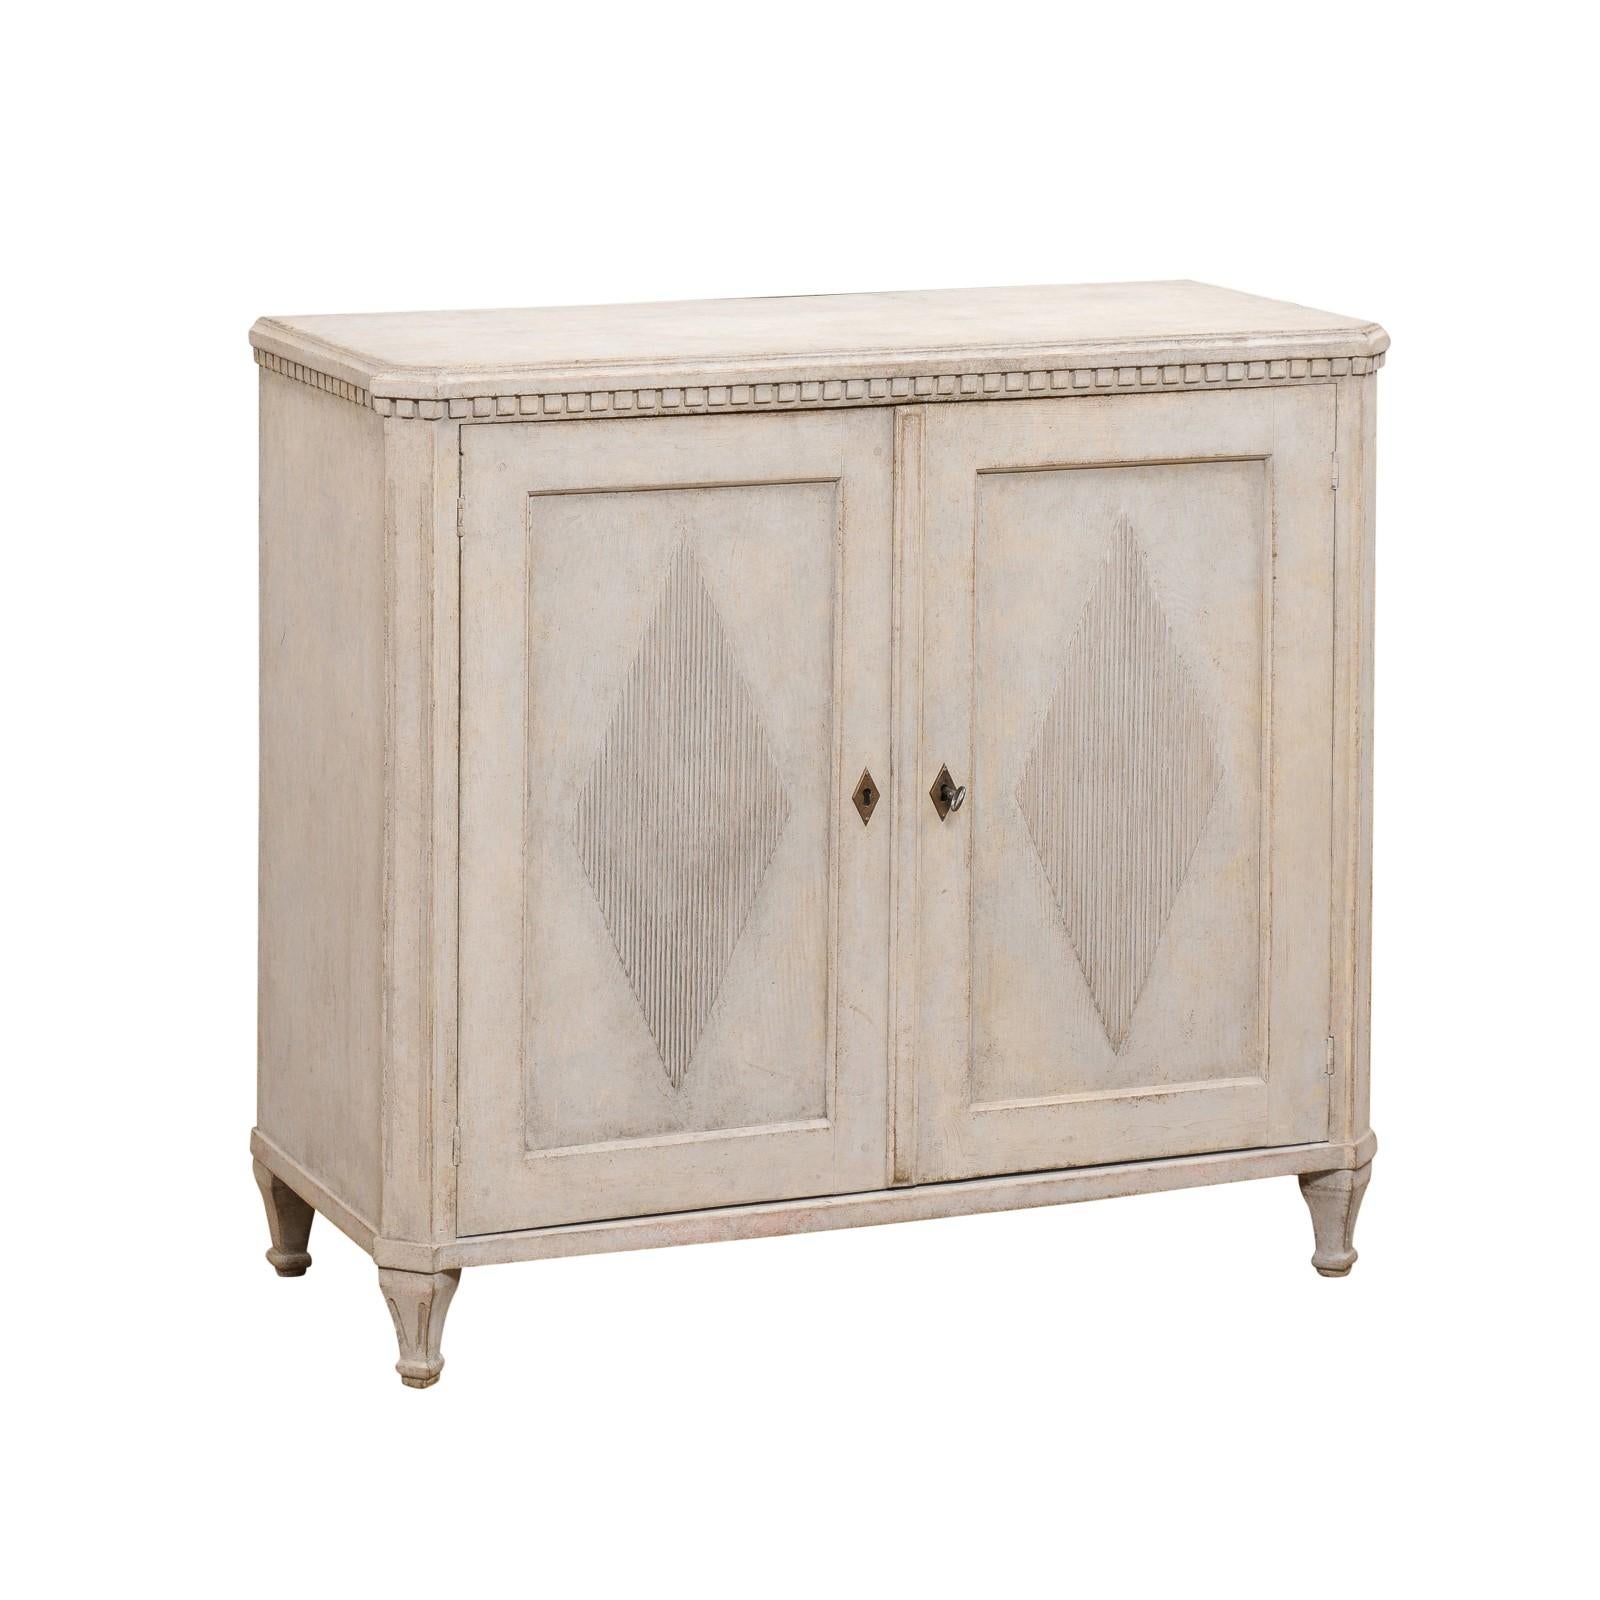 A Swedish Gustavian Style painted wood sideboard from the 19th century, with dentil molding, reeded diamond motifs and tapered feet. Created in Sweden during the 19th century, this sideboard showcases the stylistic characteristics of the Gustavian